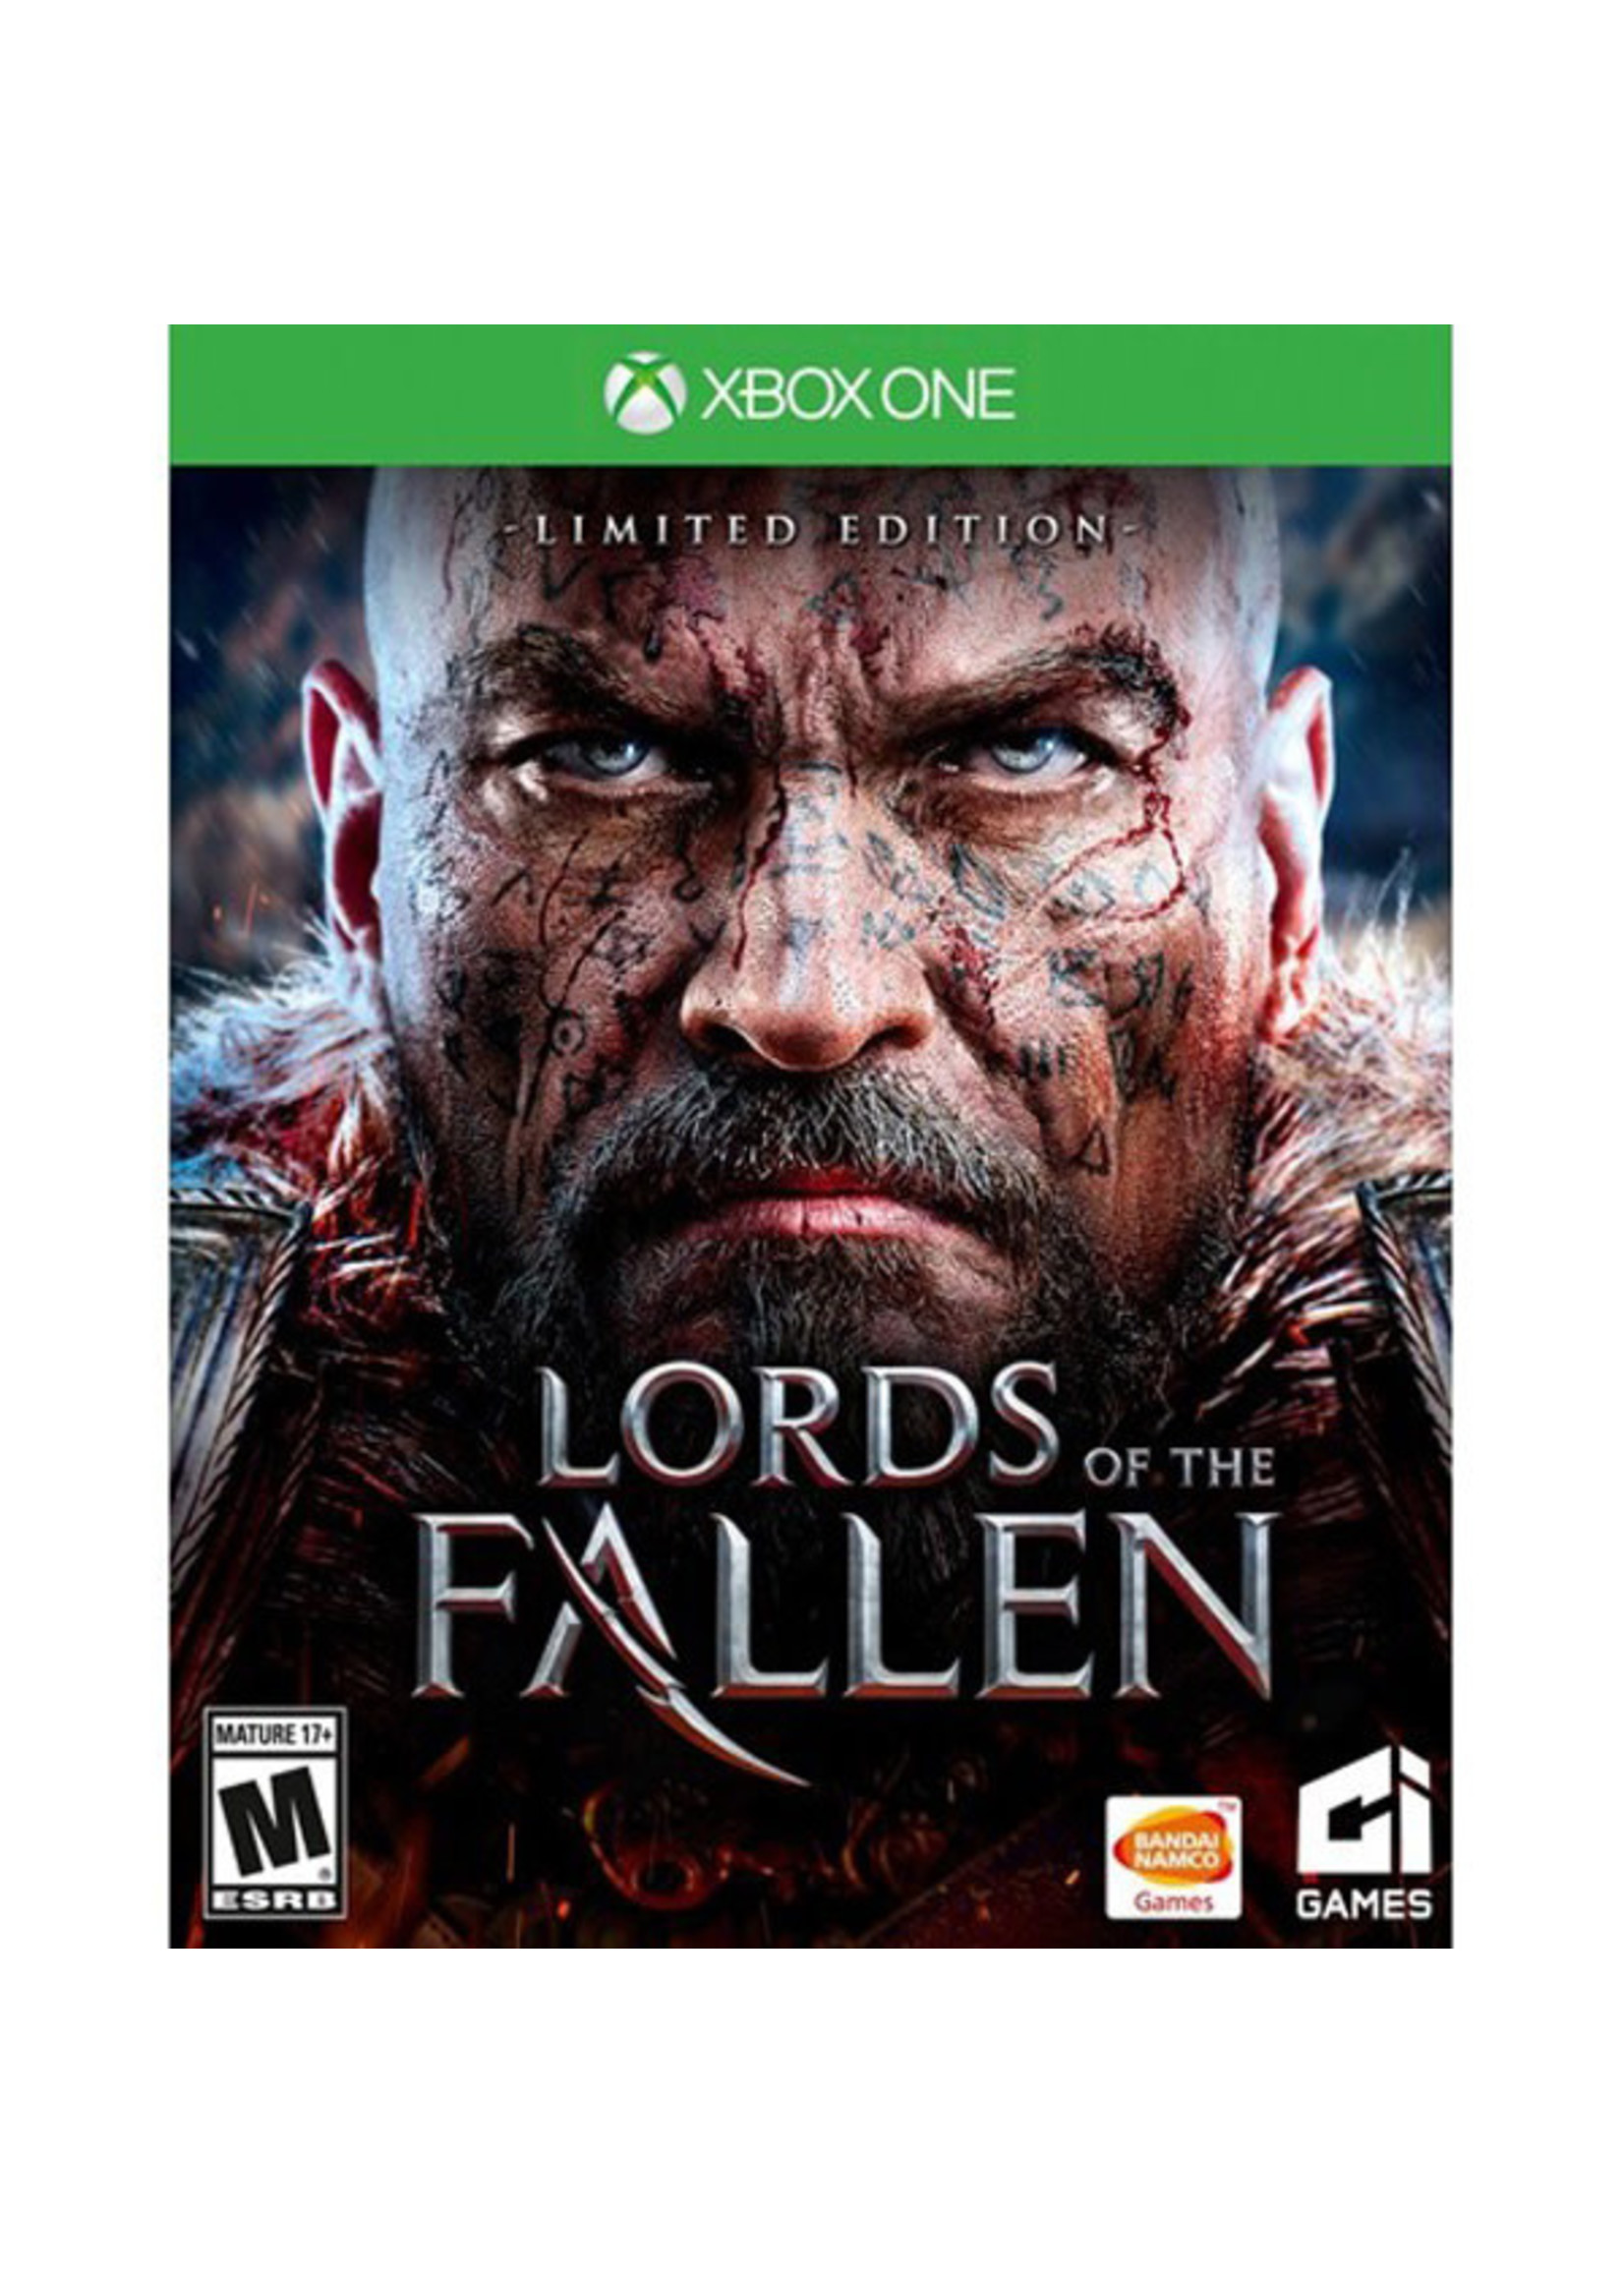 LORDS OF THE FALLEN XBOX ONE (USAGÉ)